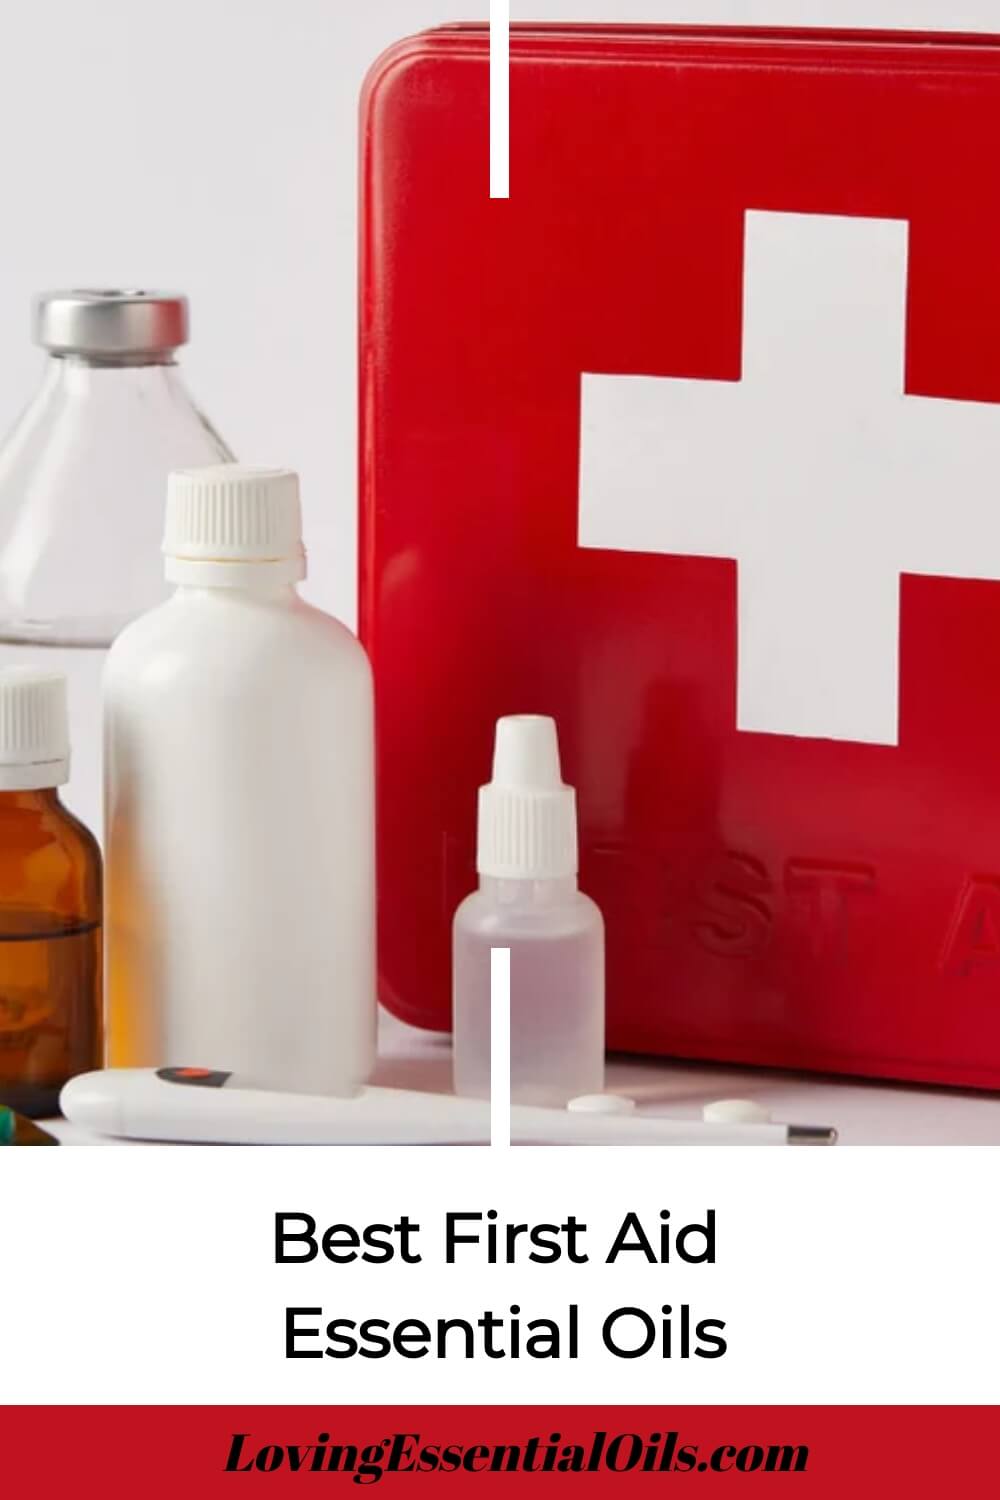 Best First Aid Essential Oils by Loving Essential Oils